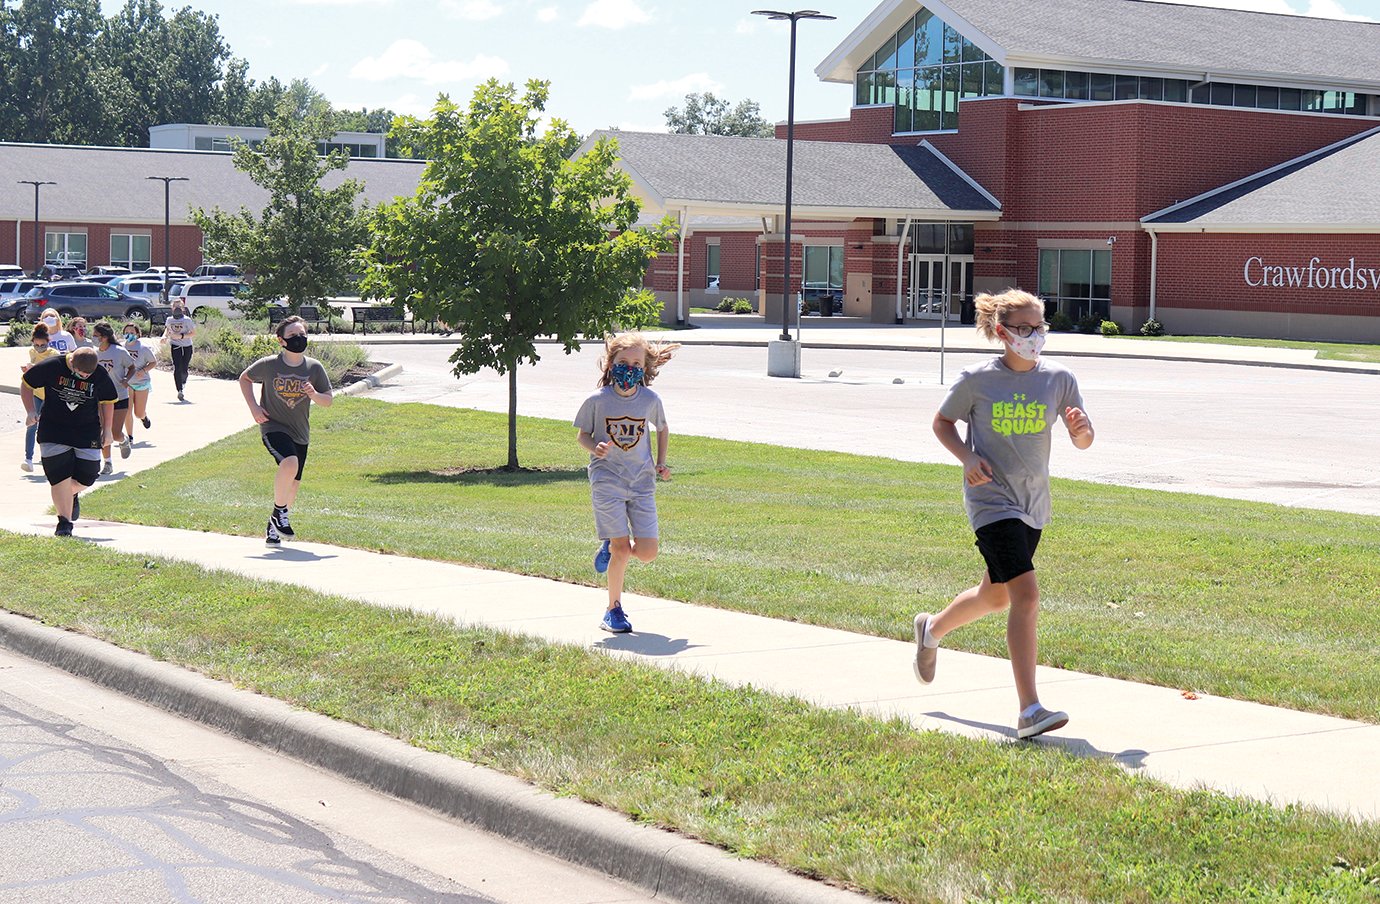 Henry Hartnett and Stormy Earls, front, head into the 20-second running portion of a couple warmup laps around the Crawfordsville Middle School parking lot Tuesday during physical education class.